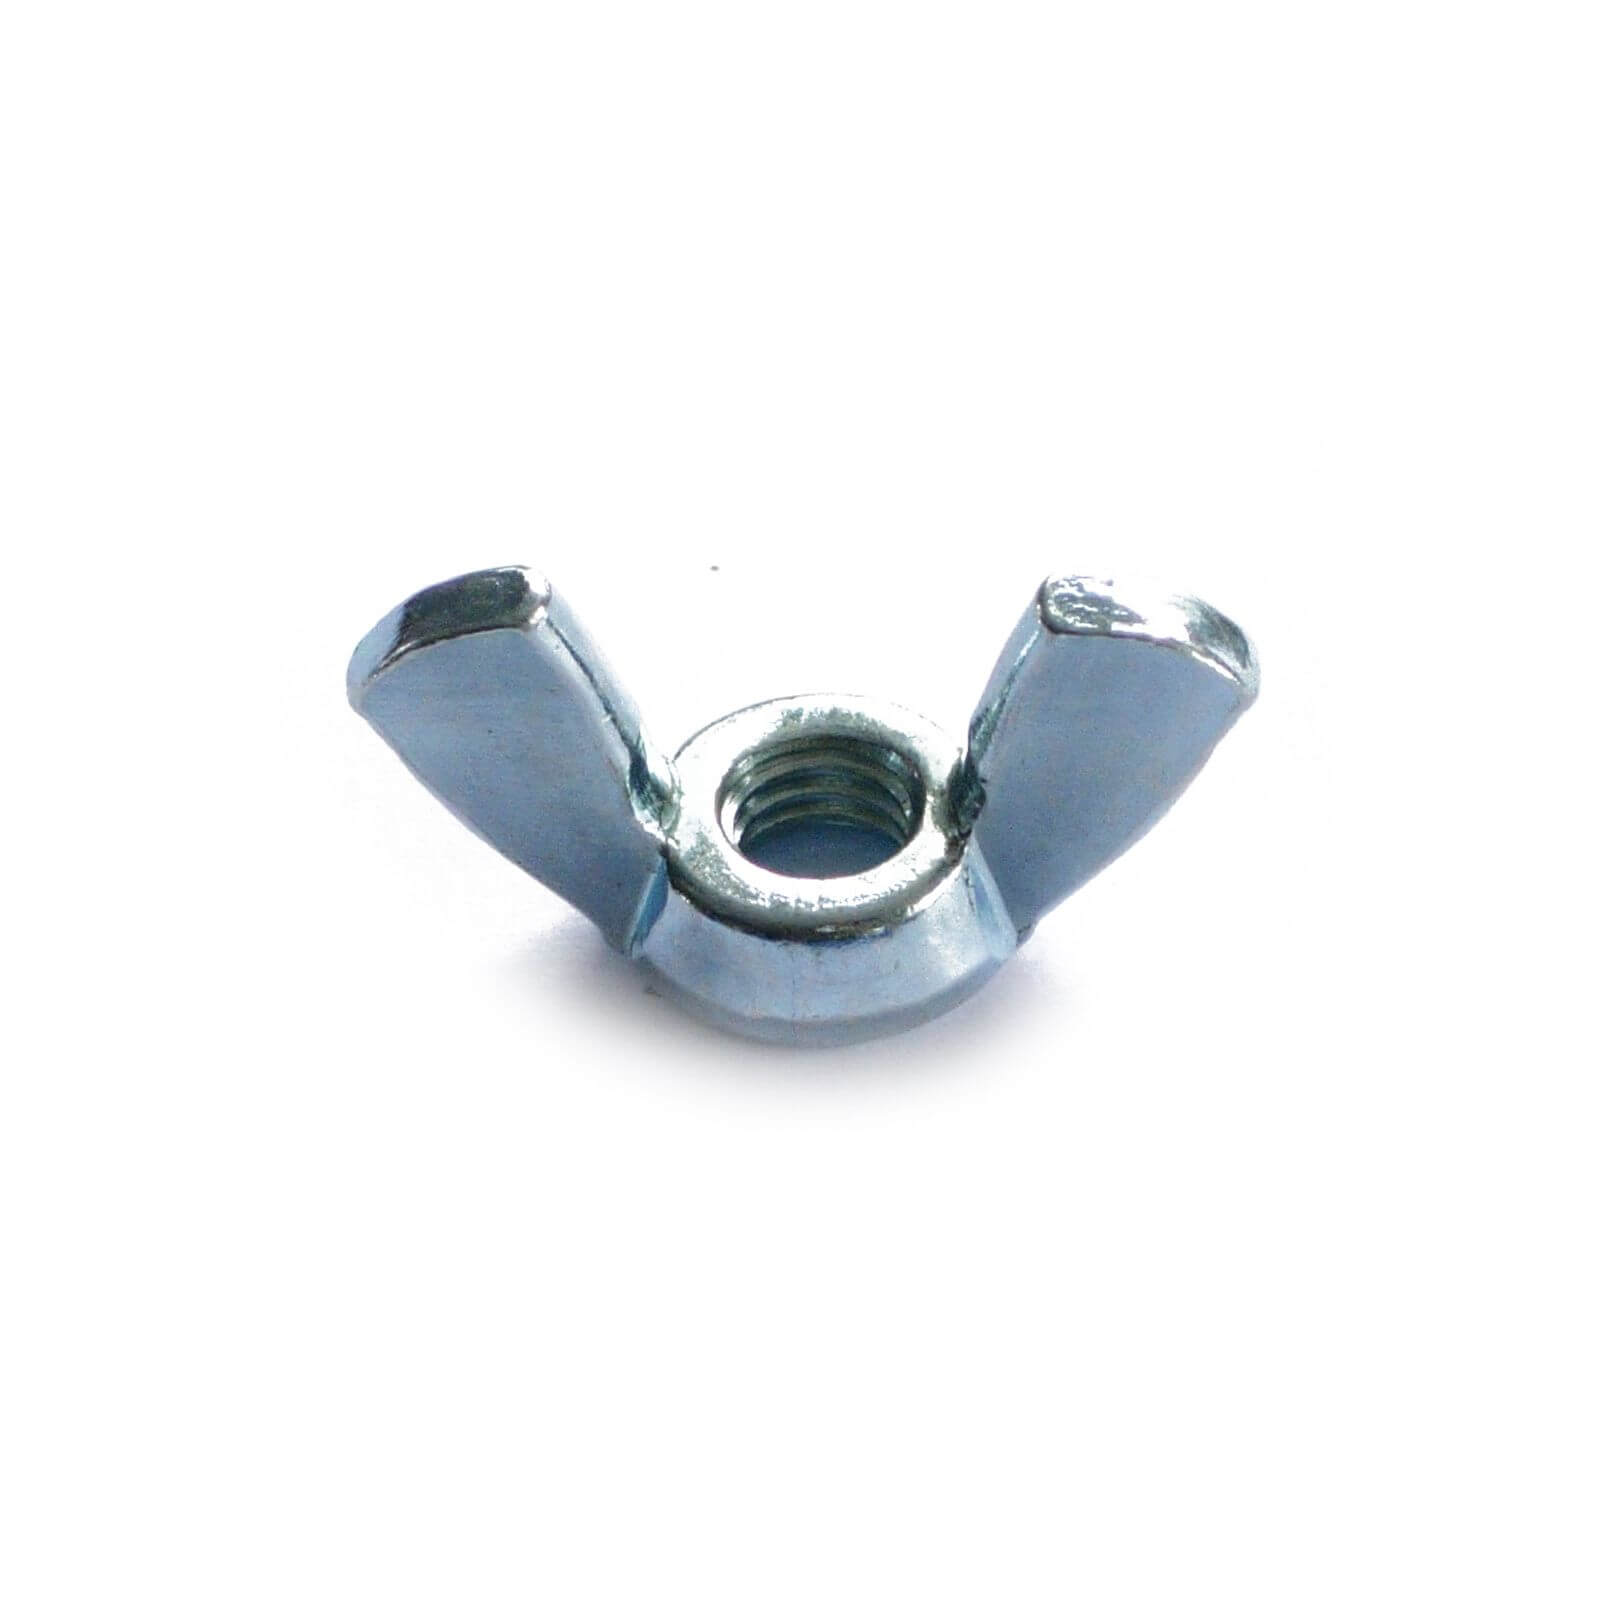 Wing Nut - Bright Zinc Plated - M8 - 5 Pack